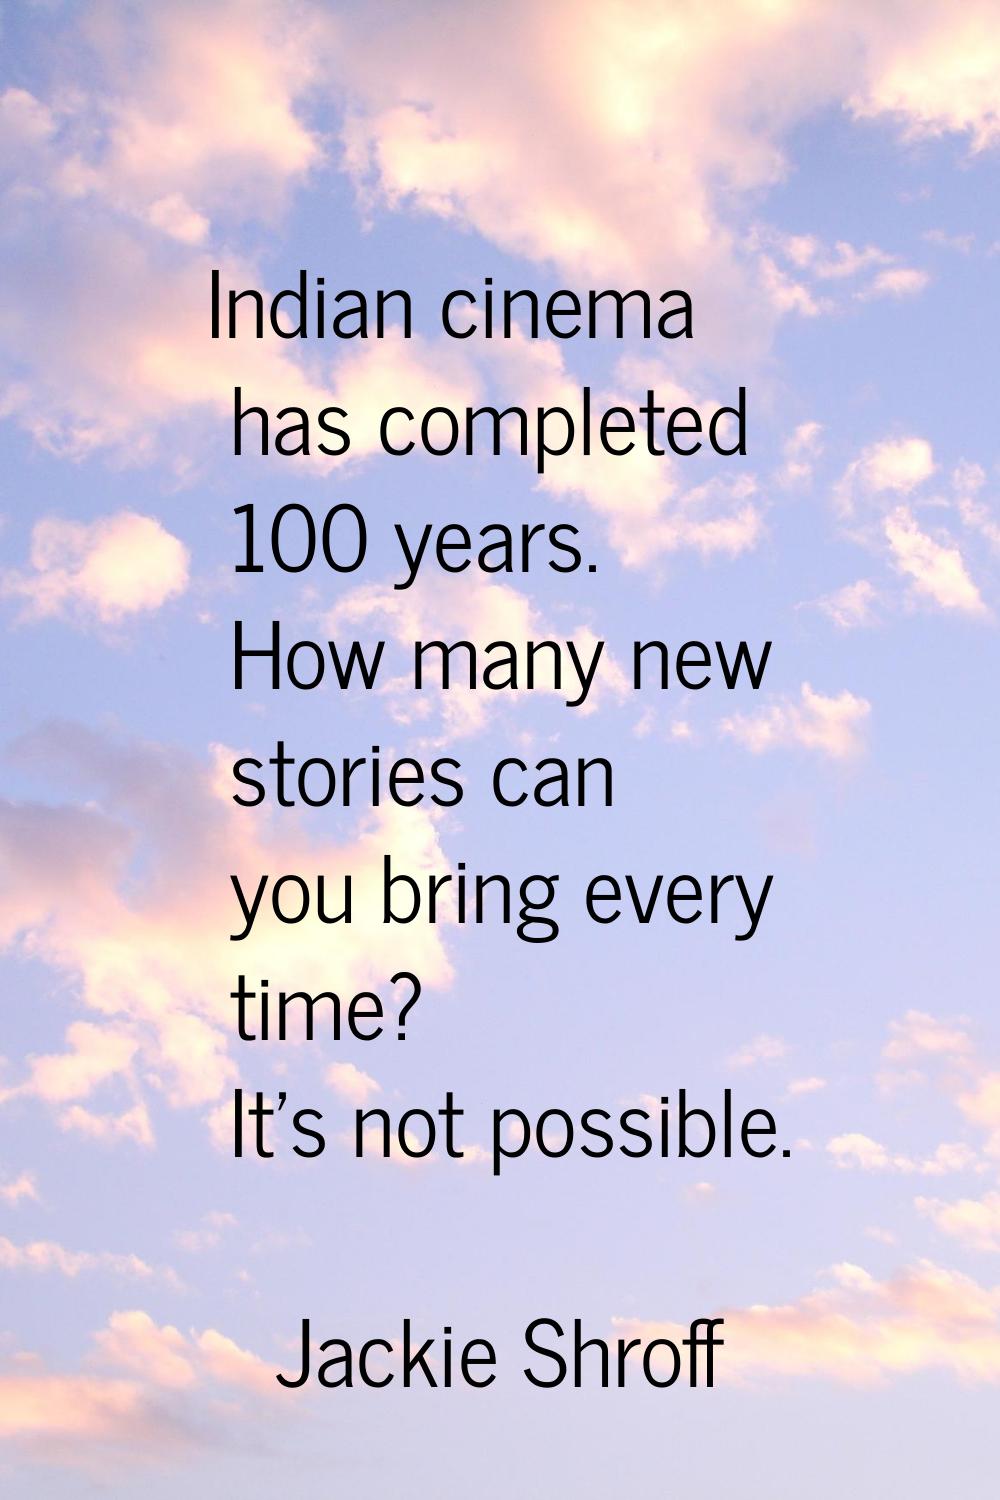 Indian cinema has completed 100 years. How many new stories can you bring every time? It's not poss